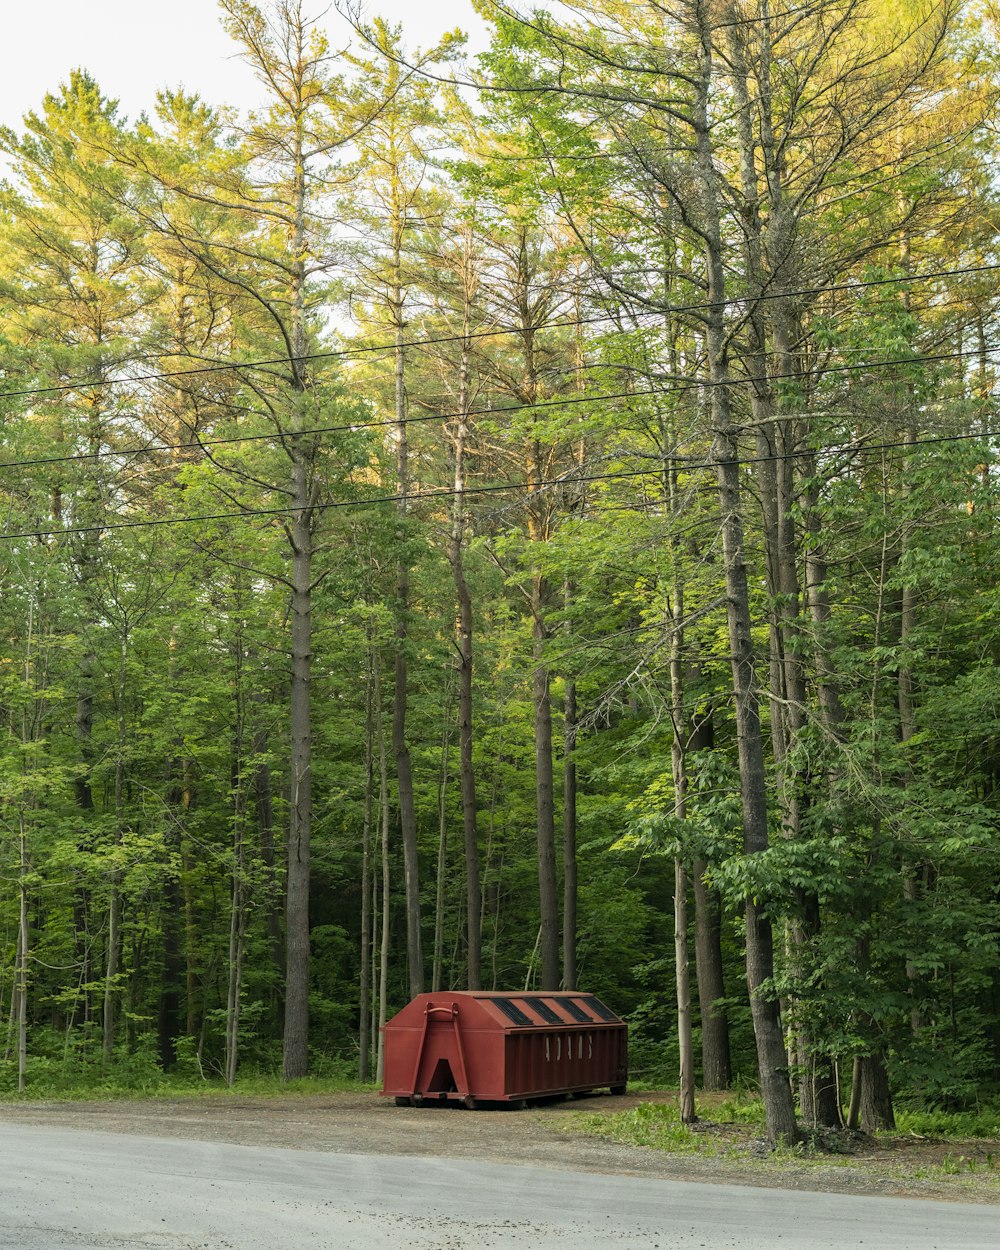 red and brown wooden shed in the middle of forest during daytime